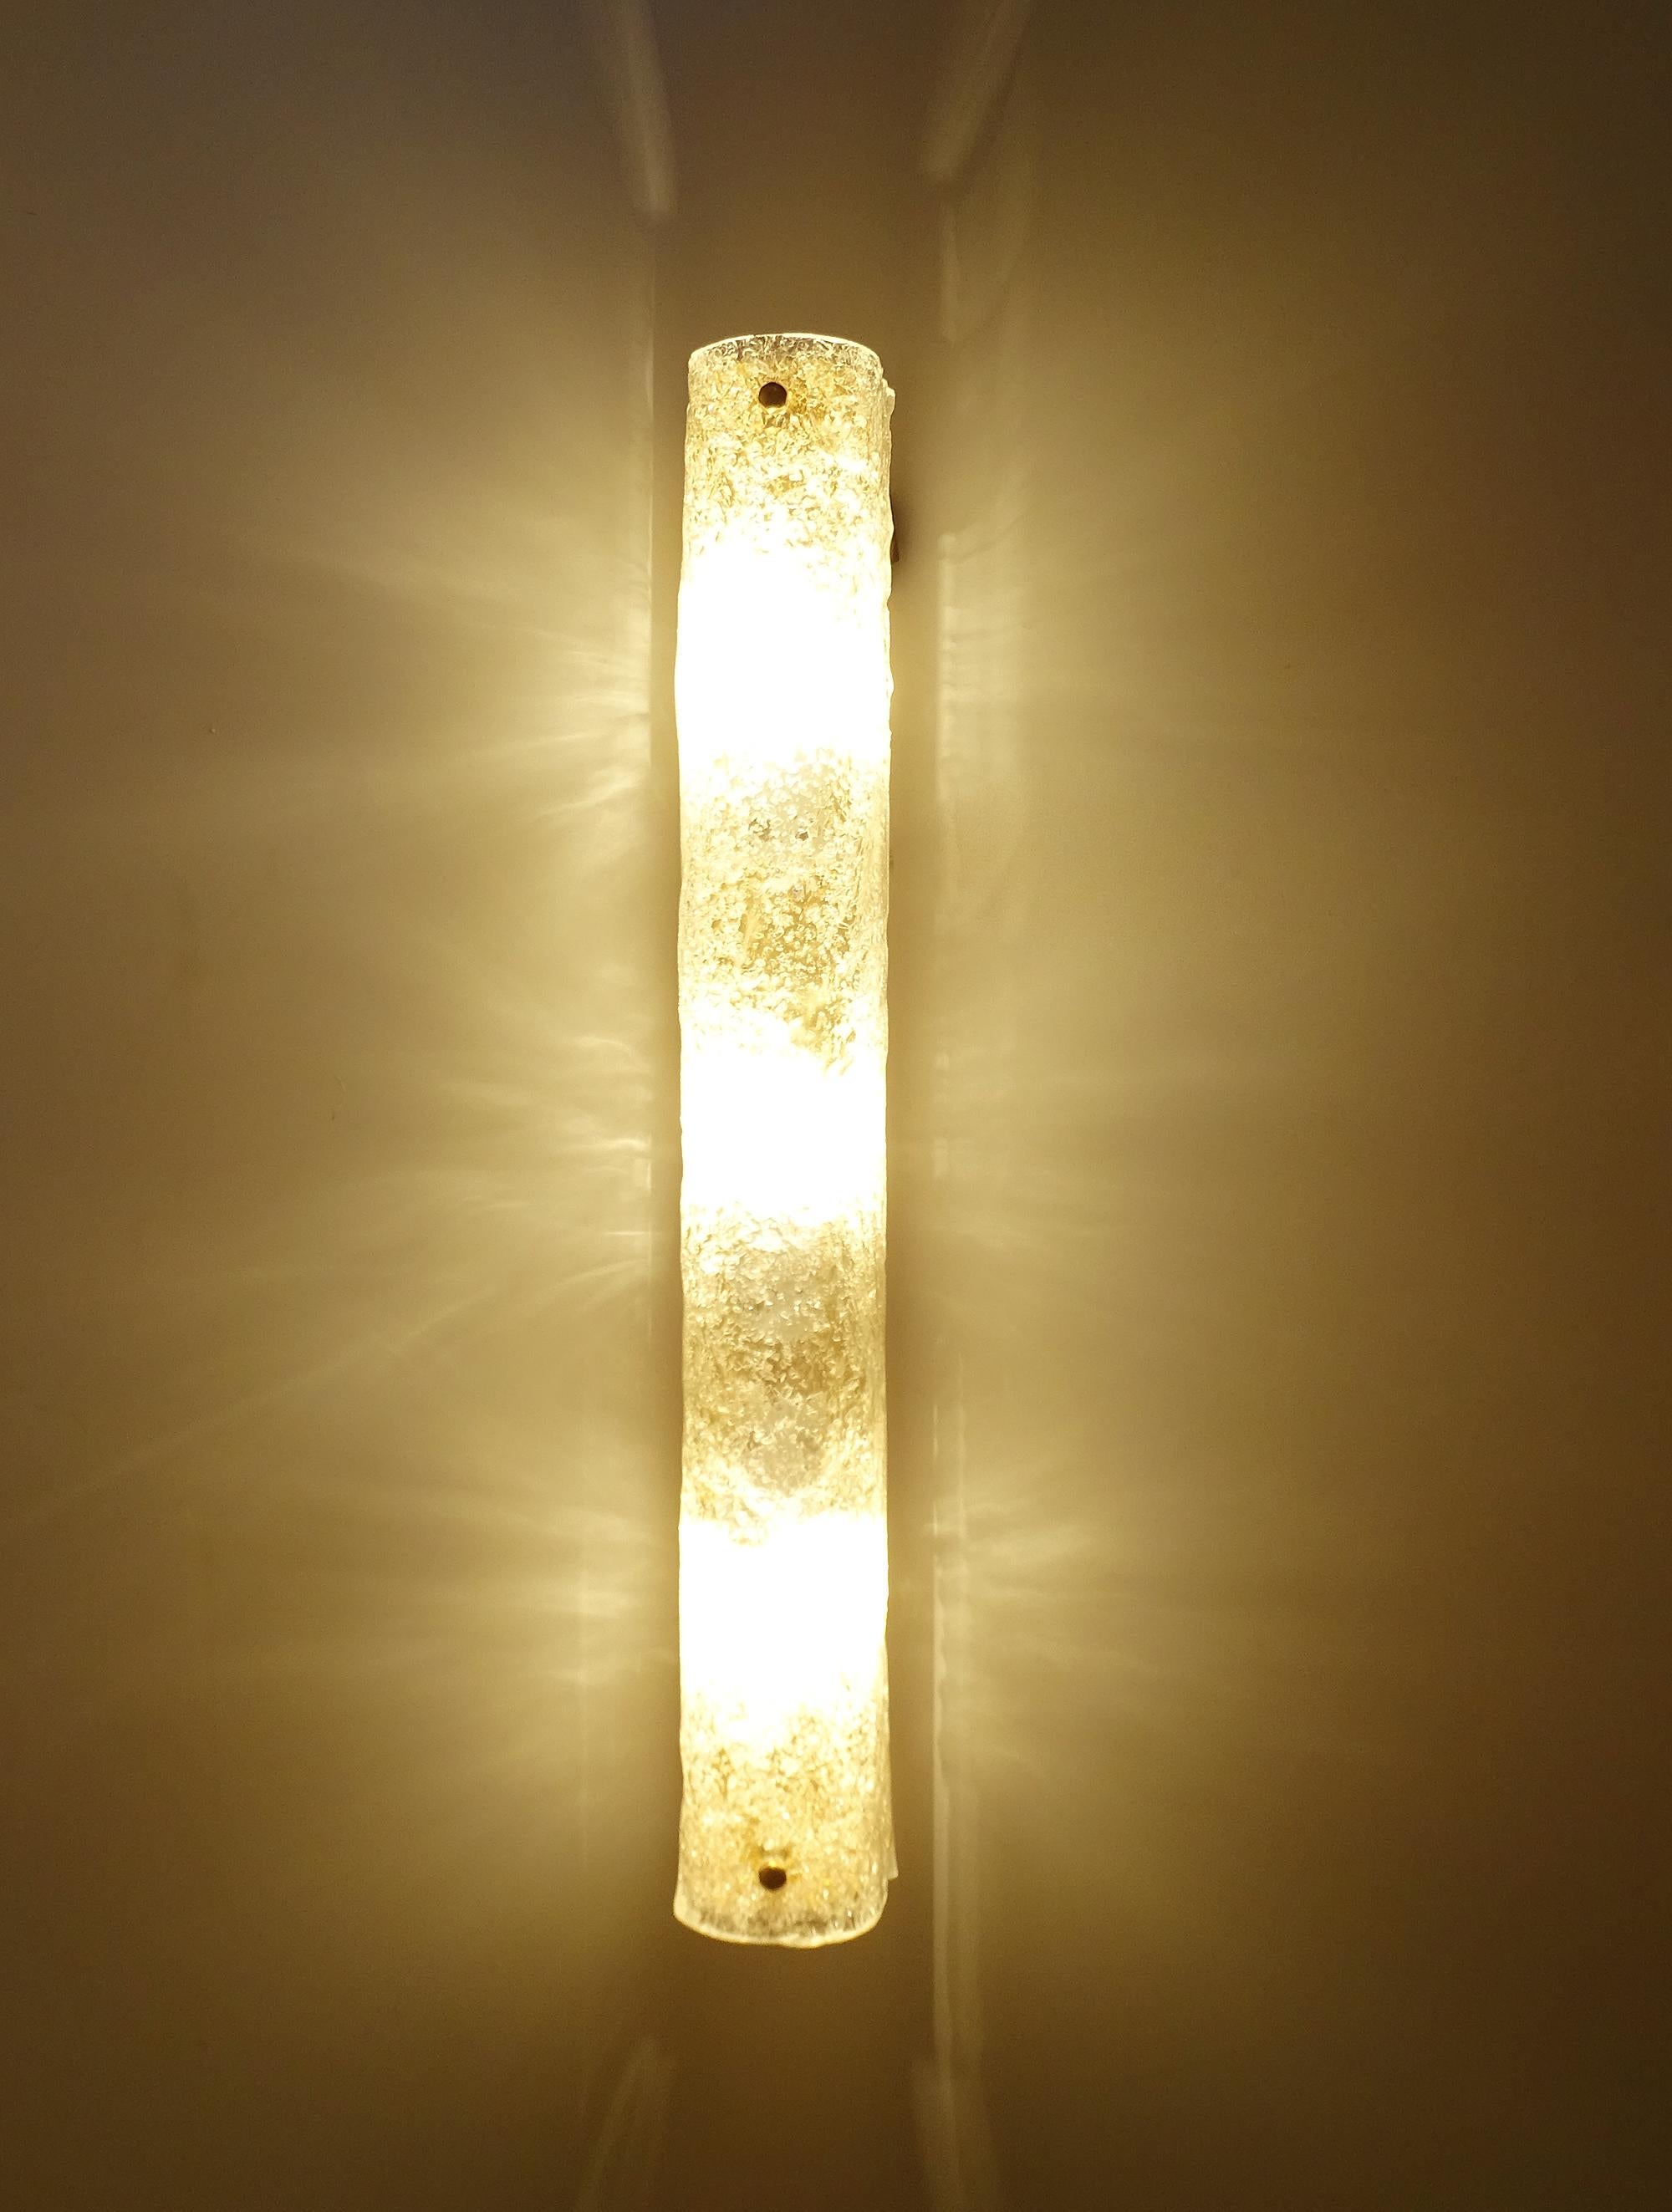 Rare and fabulous of vintage midcentury large tubular sconces by Hillebrand with handcrafted Murano glass, They have a brass base, versions which were produced in very small output with three porcelain fitting, each for E27 standard screw bulbs to